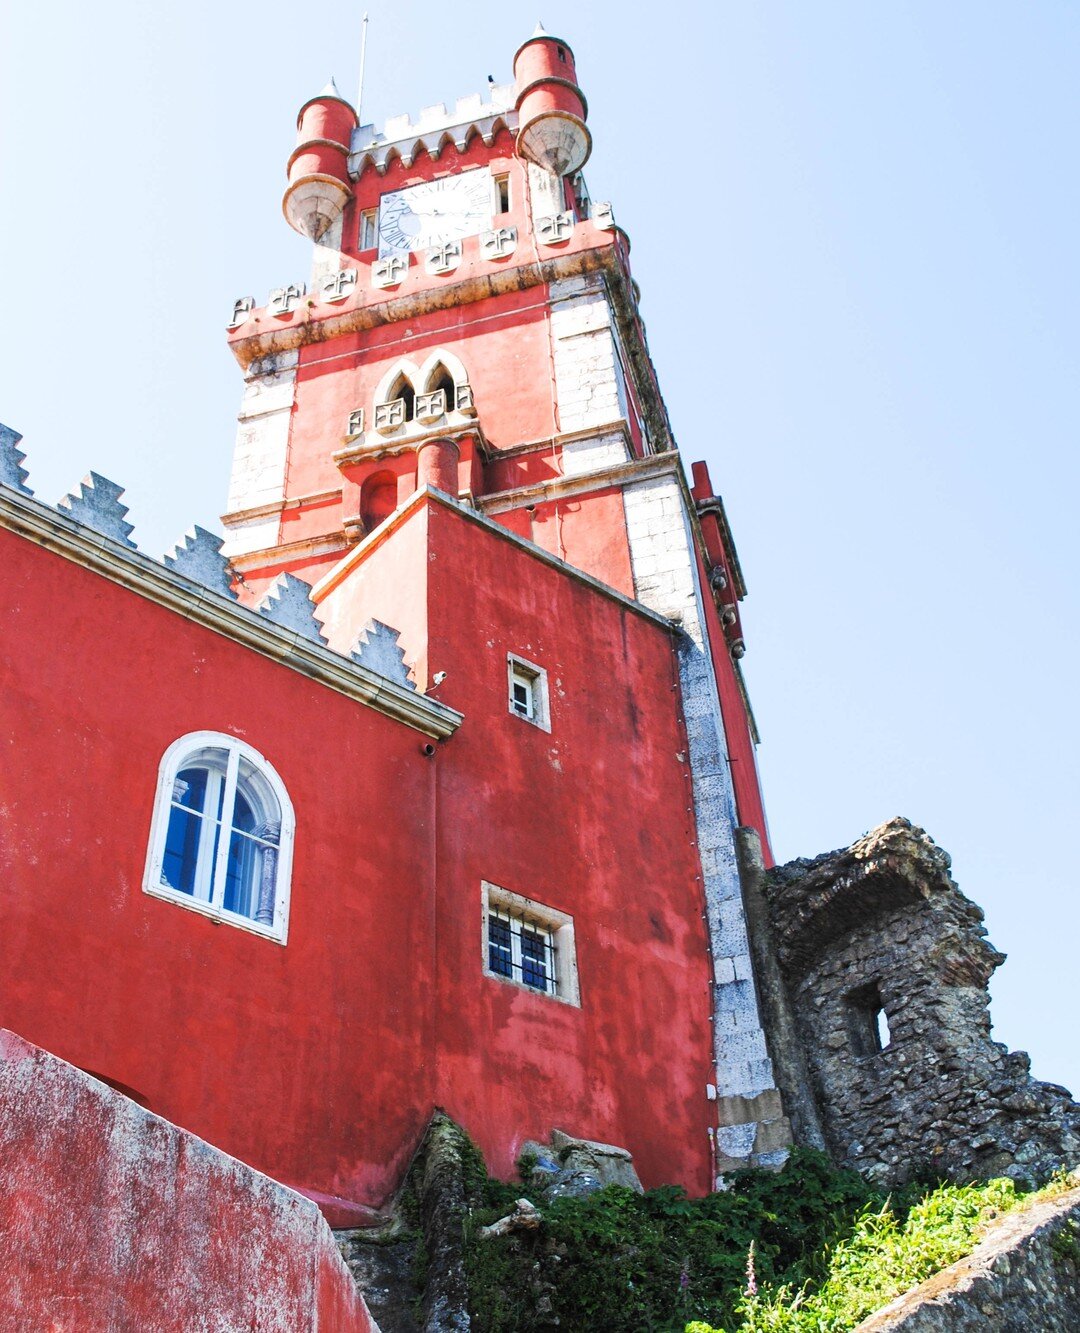 More from Pena Palace in Sintra, Portugal. This red tower offers spectacular views.⁠
#citizensco⁠
..⁠
..⁠
..⁠
..⁠
#afar #adventure #beautifuldestinations  #bestvacations #cntraveler #exploremore #guardiantravelsnaps #igdaily  #instagood #instadaily #